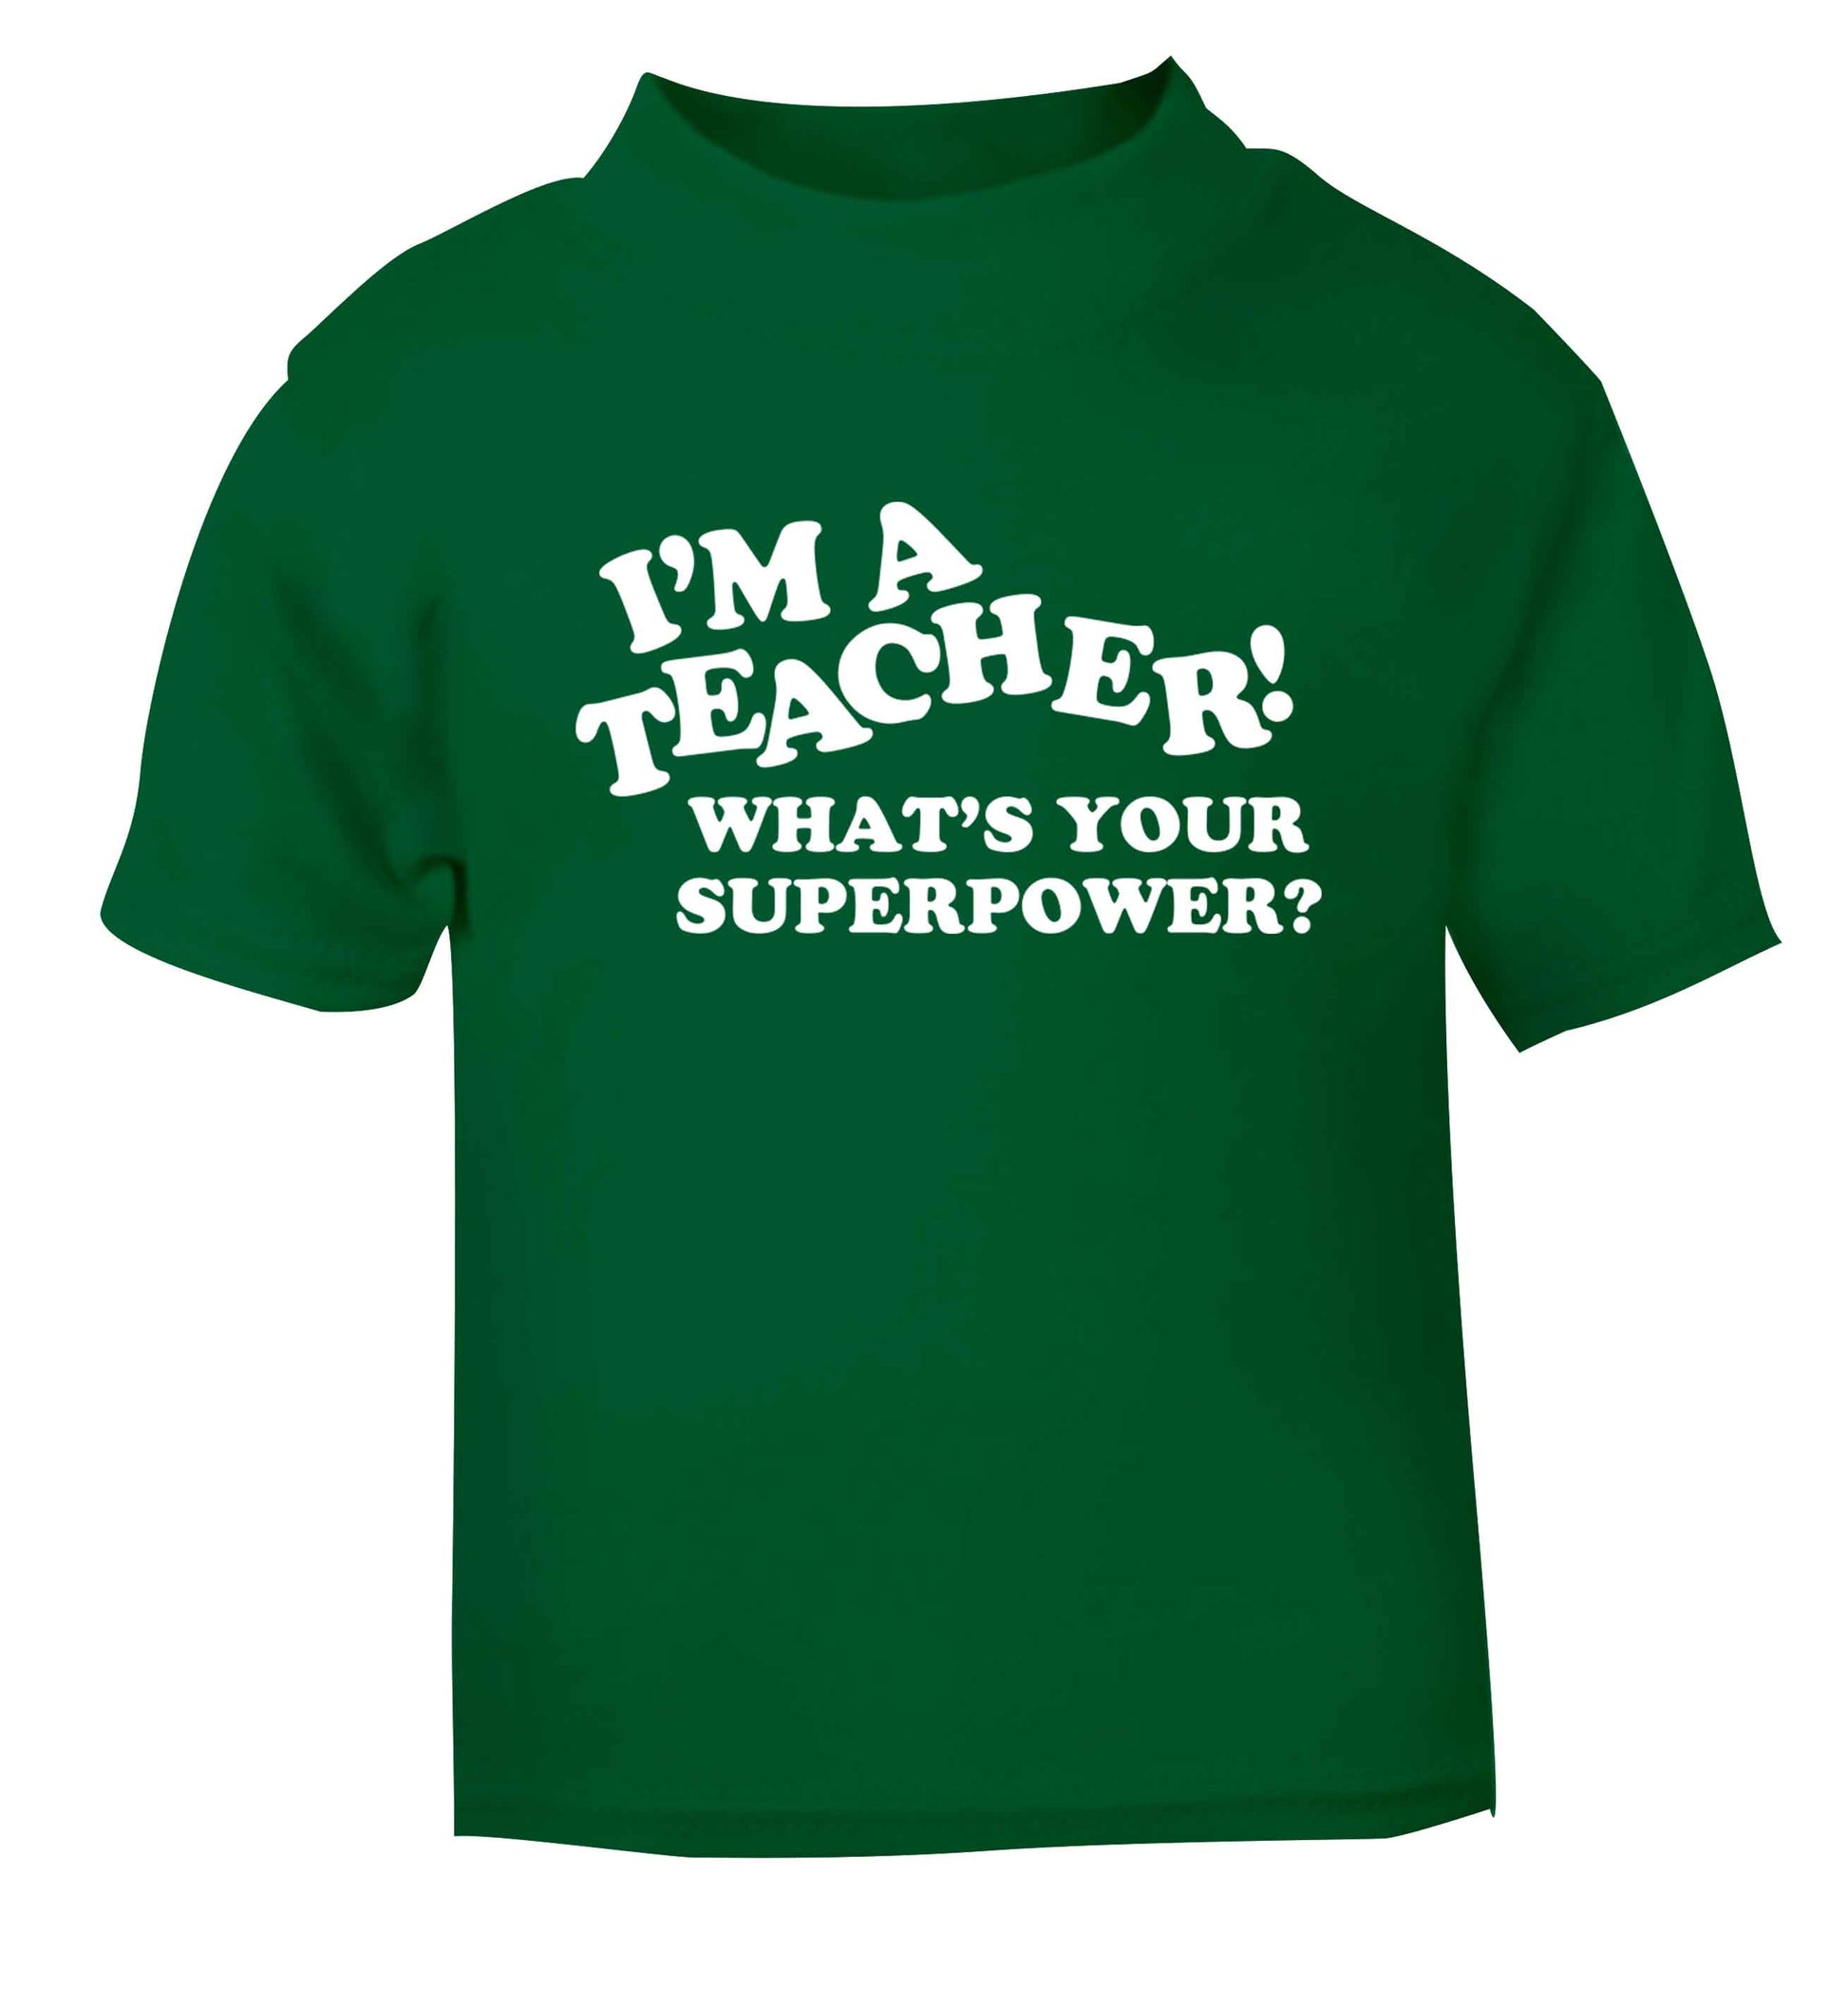 I'm a teacher what's your superpower?! green baby toddler Tshirt 2 Years